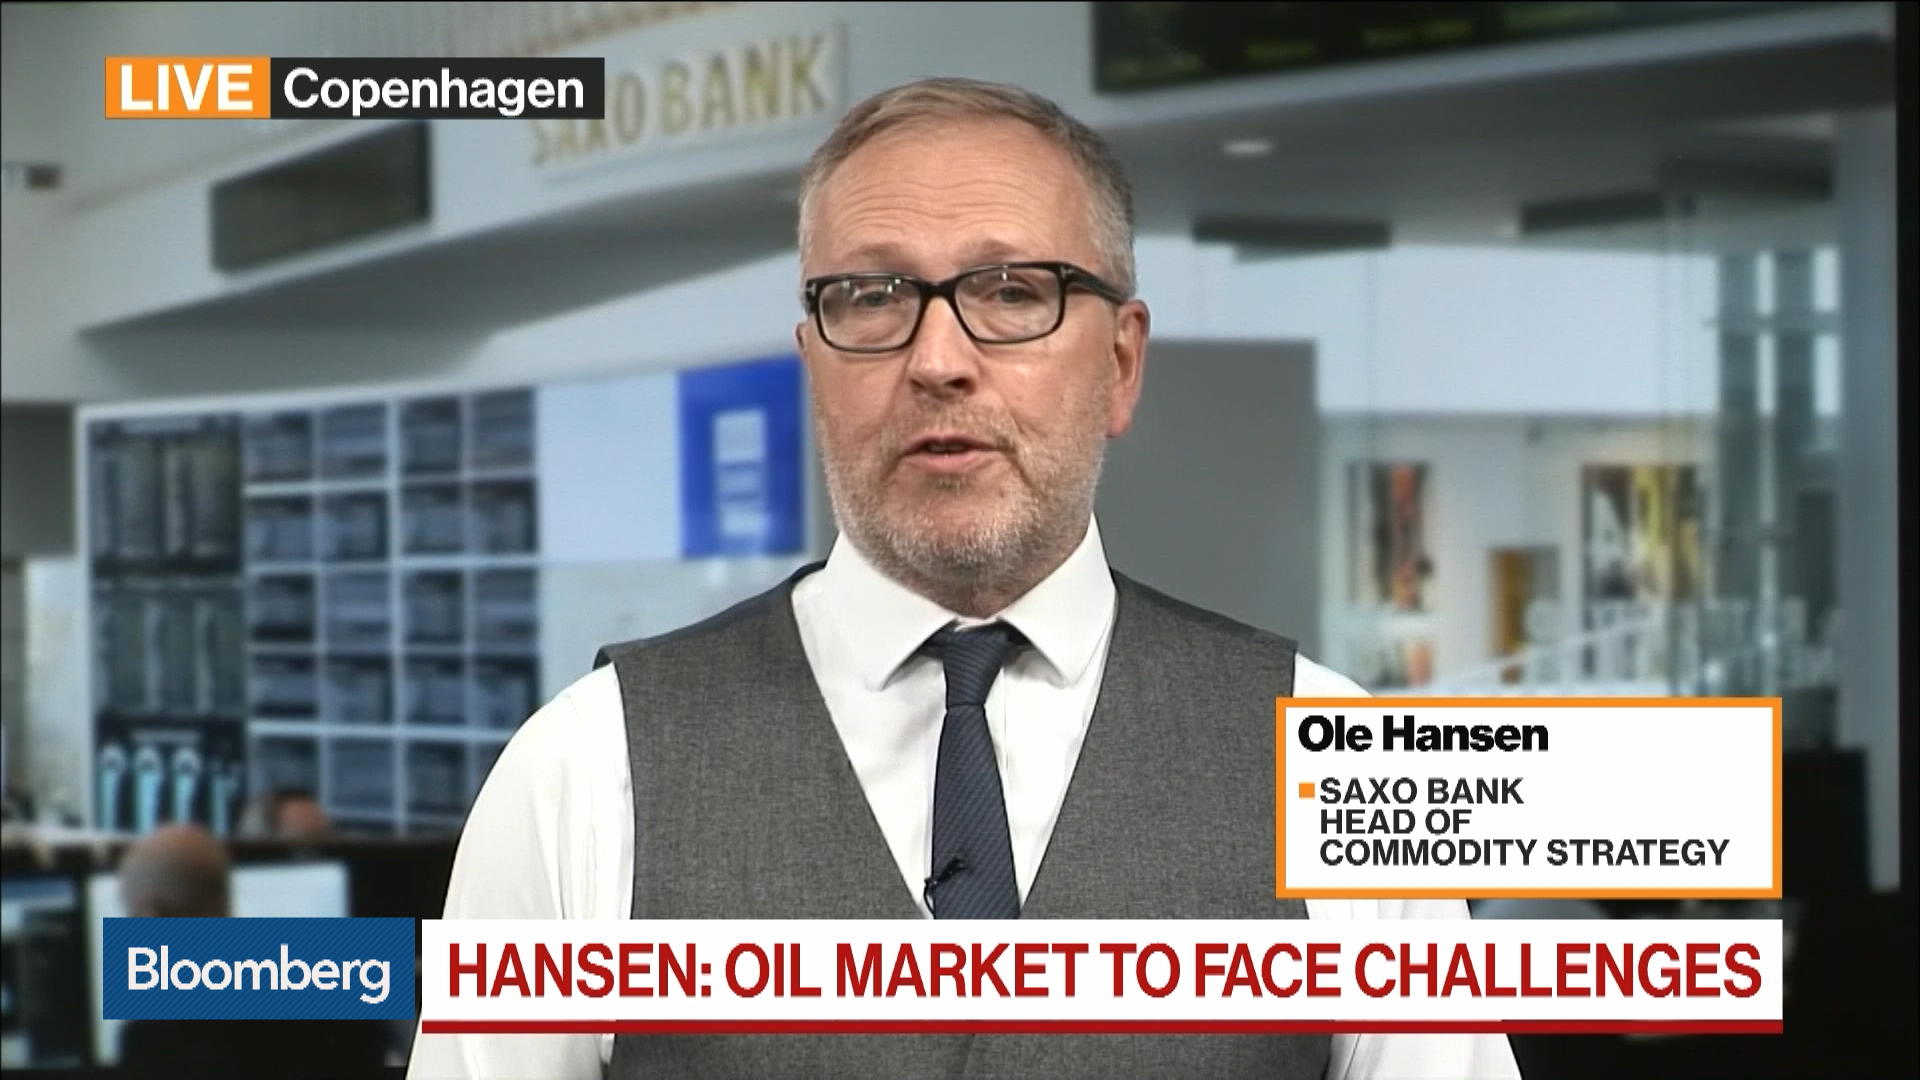 Watch axo Bank Head of Commodity Strategy Ole Hansen on Oil Outlook - Bloomberg